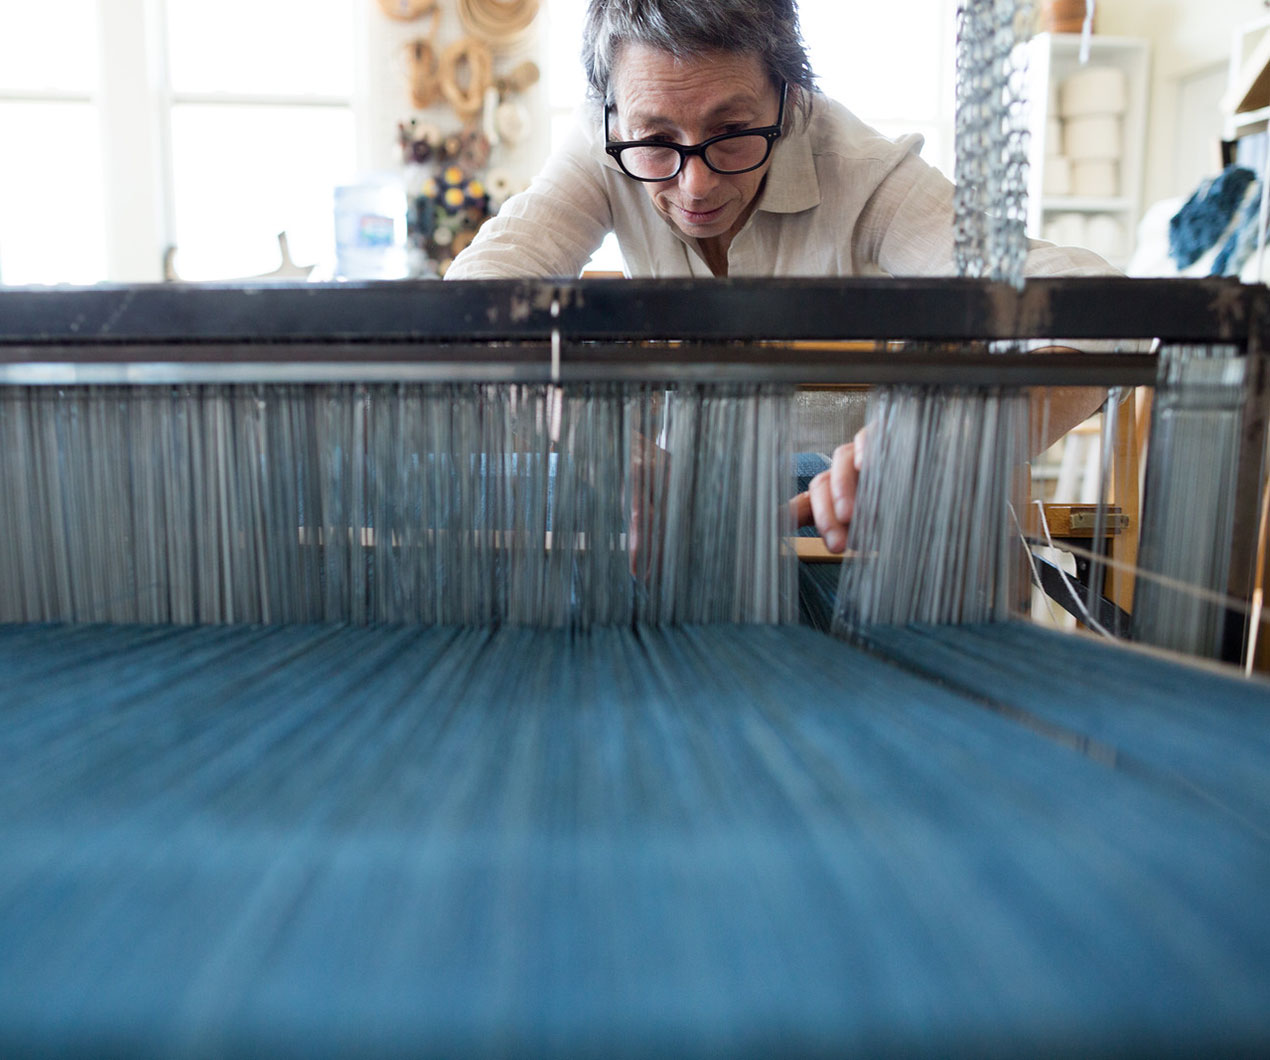 weaving, photo by Paige Green